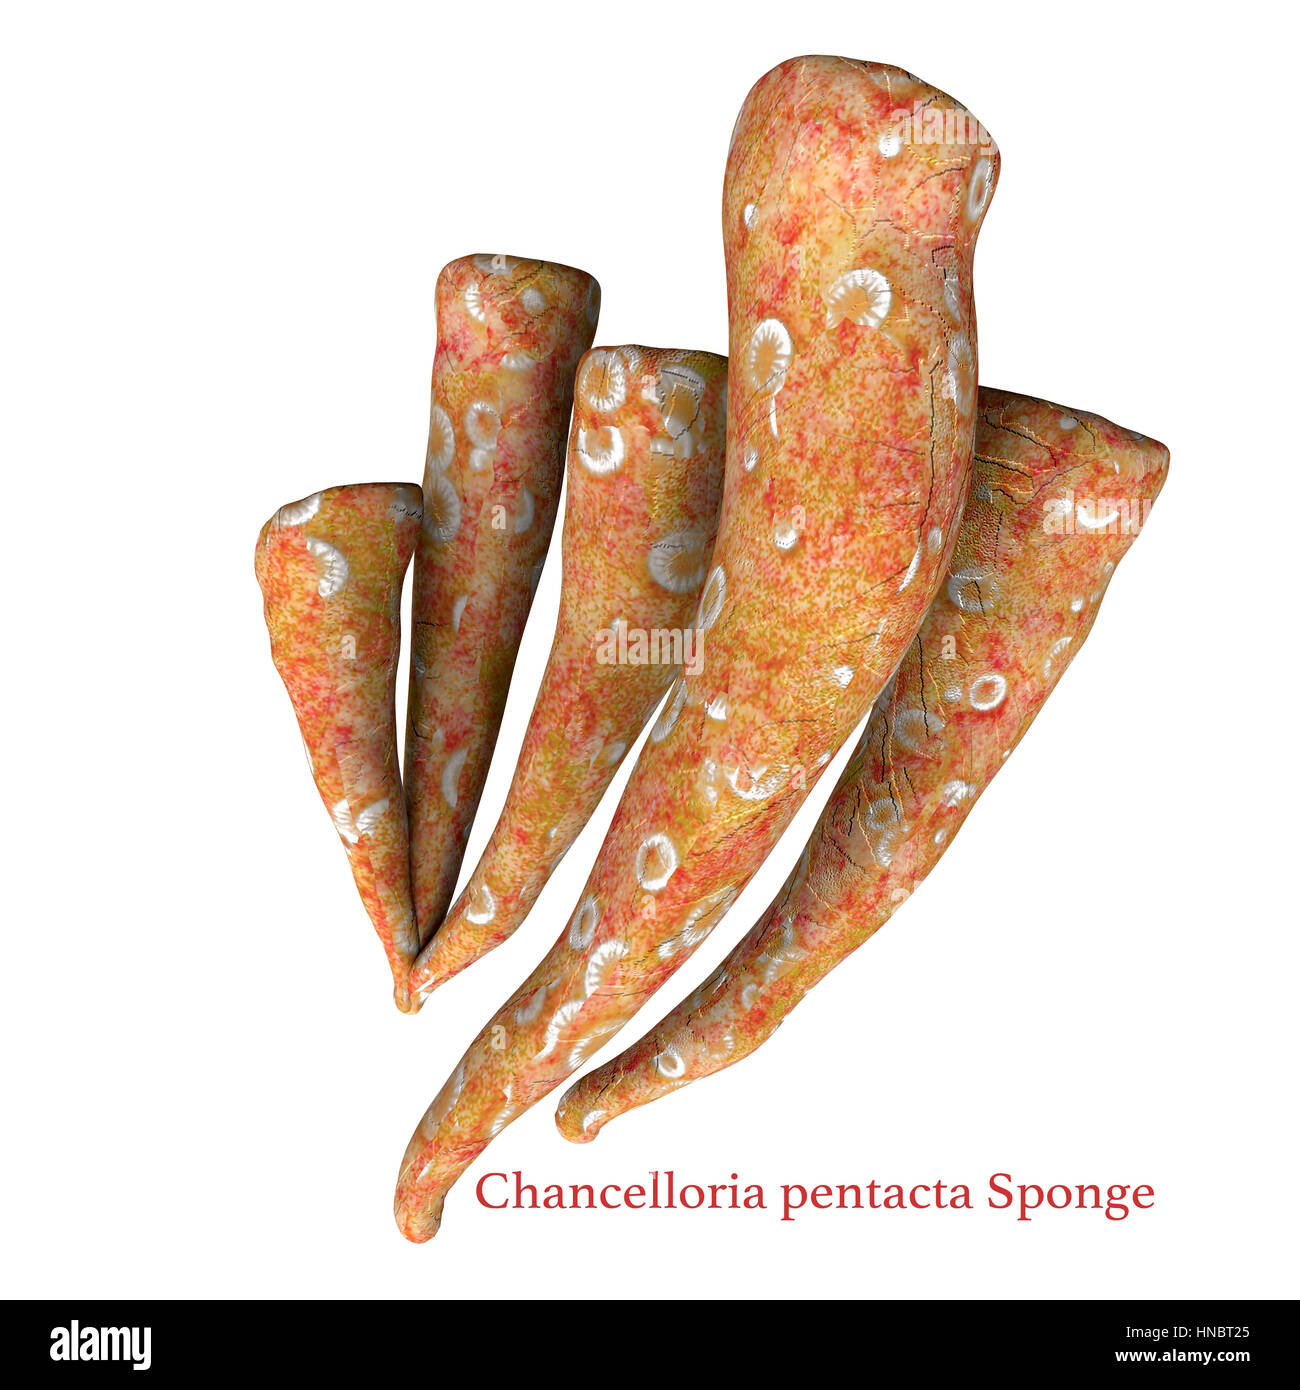 The Chancelloria pentacta sponge lived in Cambrian seas and its fossils can be found in Burgess shale deposits in Canada. Stock Photo